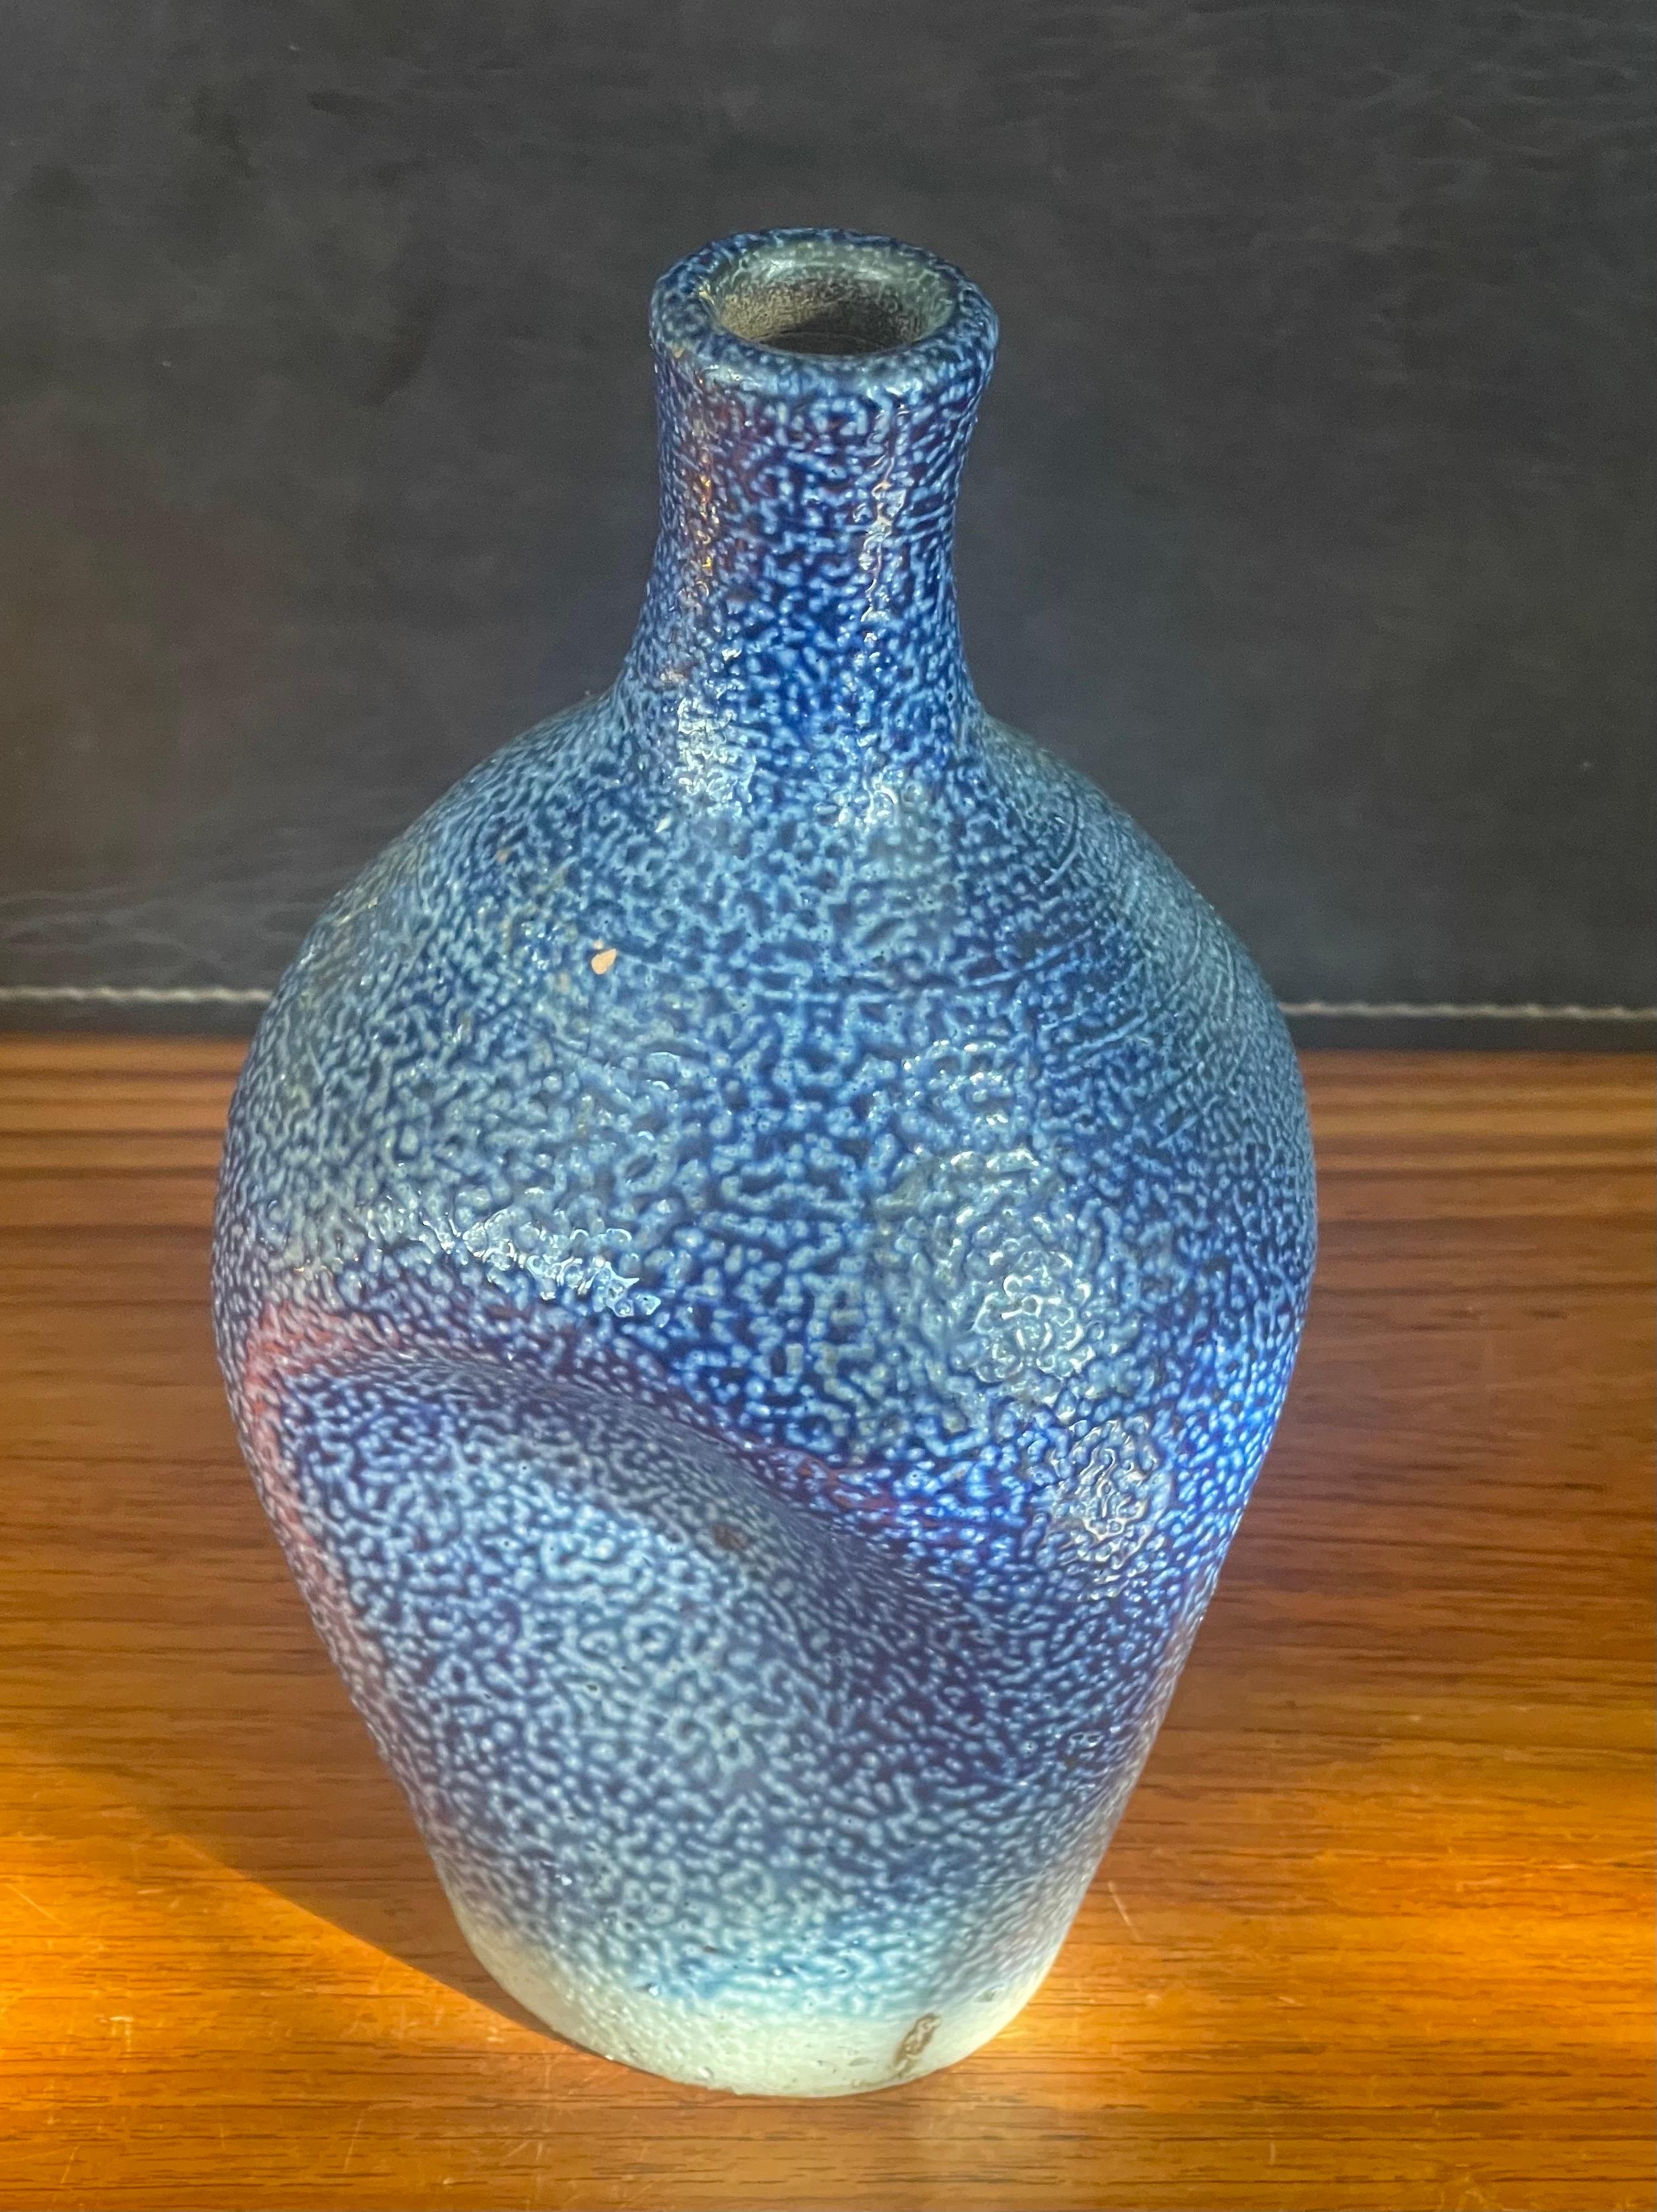 California Studio Pottery Vase with Dimpled Sides In Good Condition For Sale In San Diego, CA